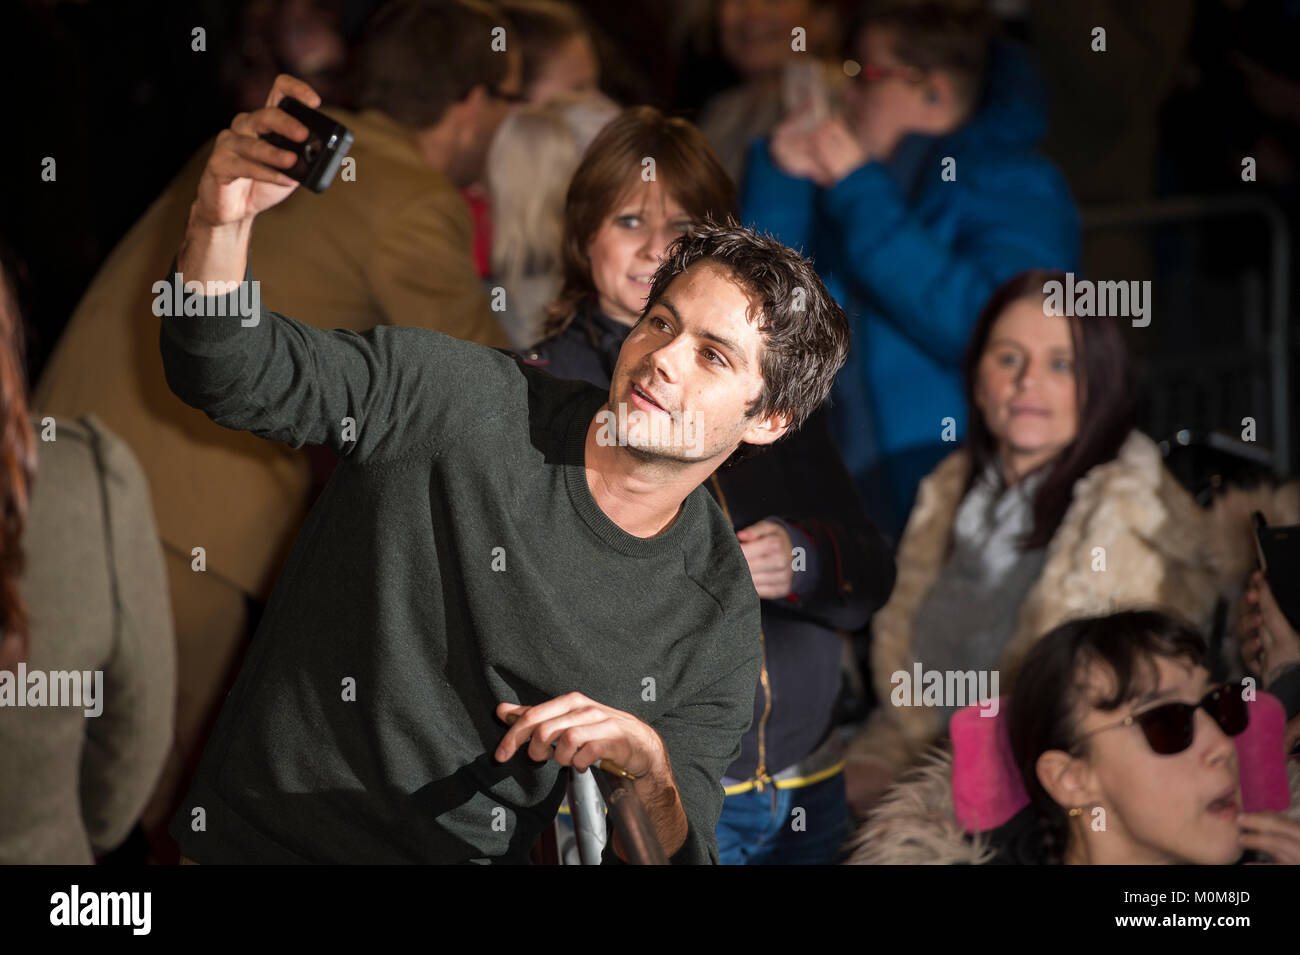 London, UK. 22nd Jan, 2018. Dylan O'Brien attends the 'Maze Runner: The Death Cure' film premiere, London, UK - 22 Jan 2018 Credit: Gary Mitchell/Alamy Live News Stock Photo